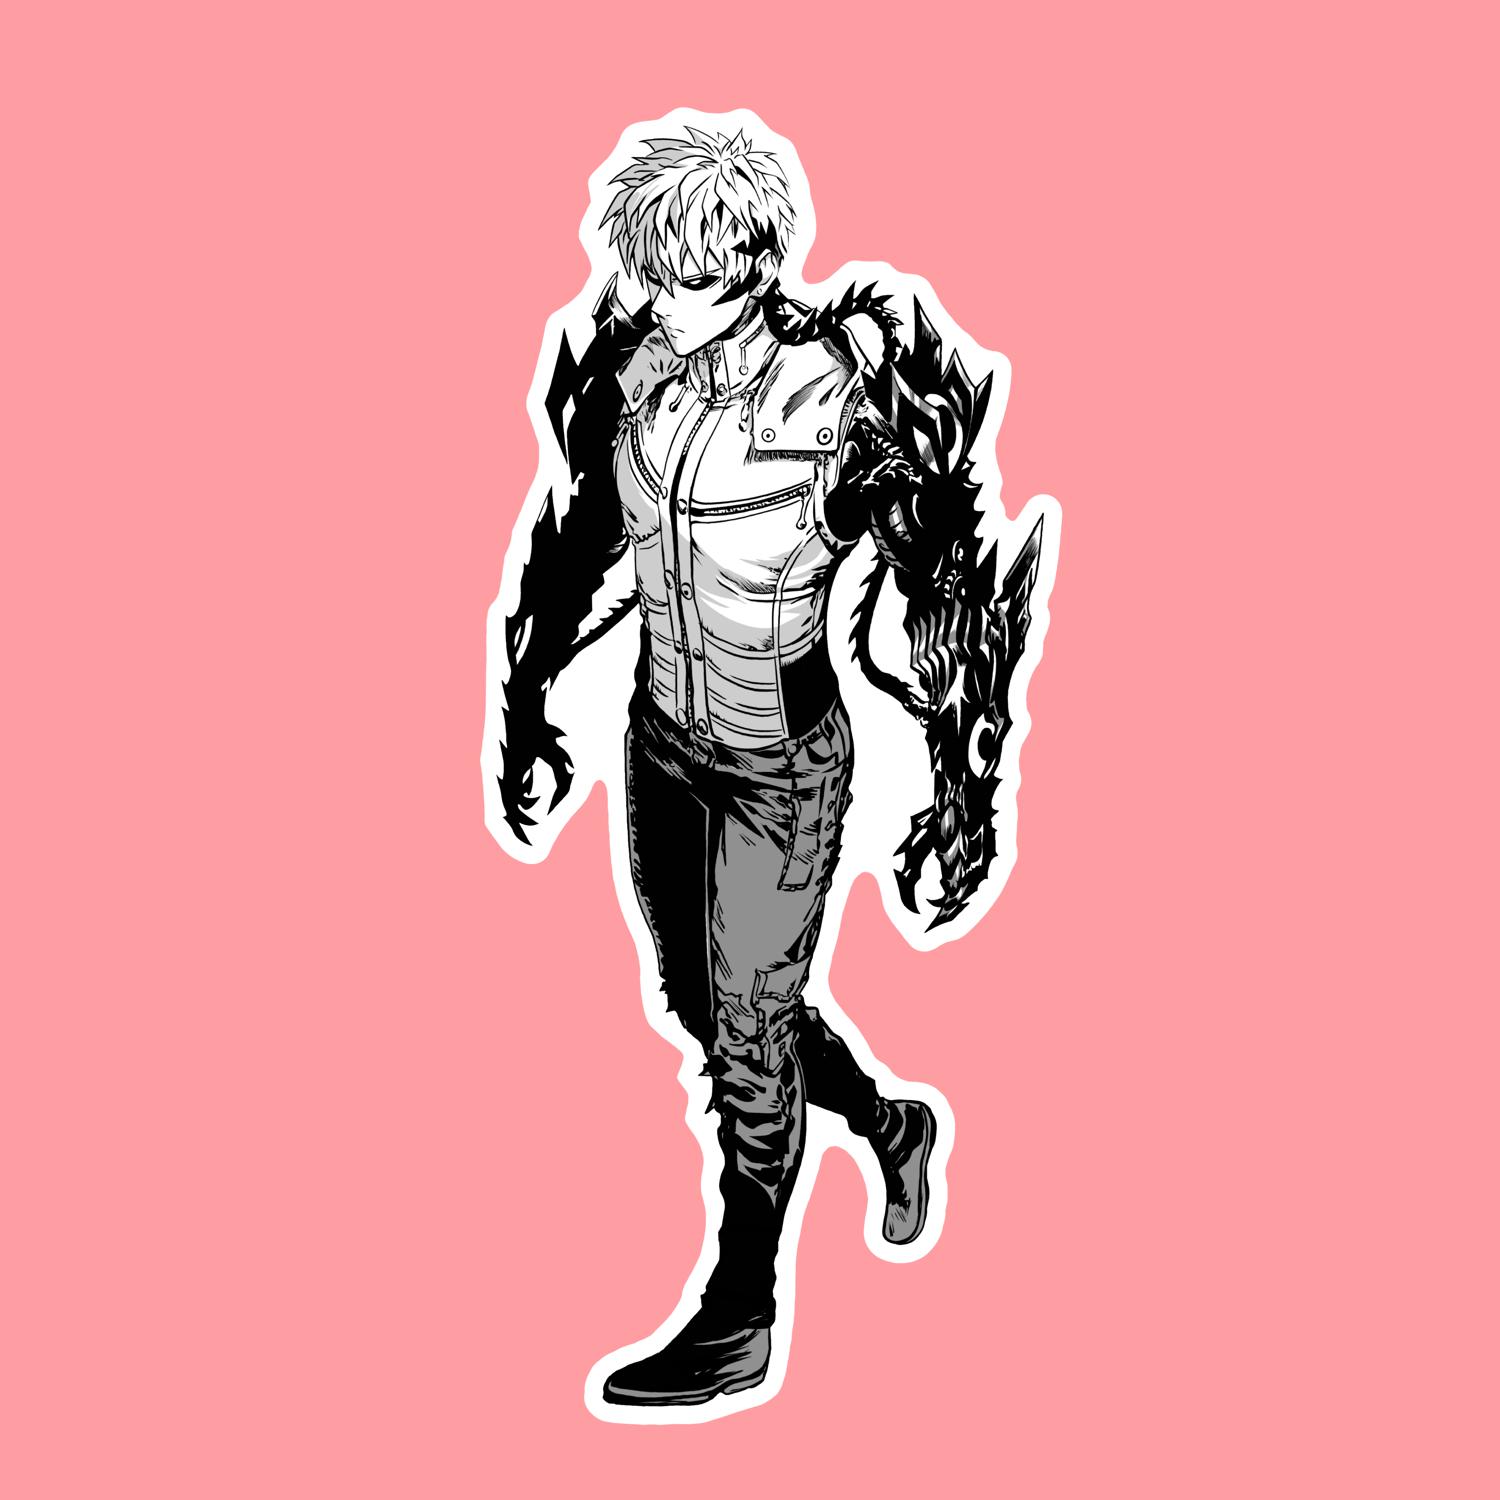 How to draw Genos from One Punch Man | speed drawing - YouTube